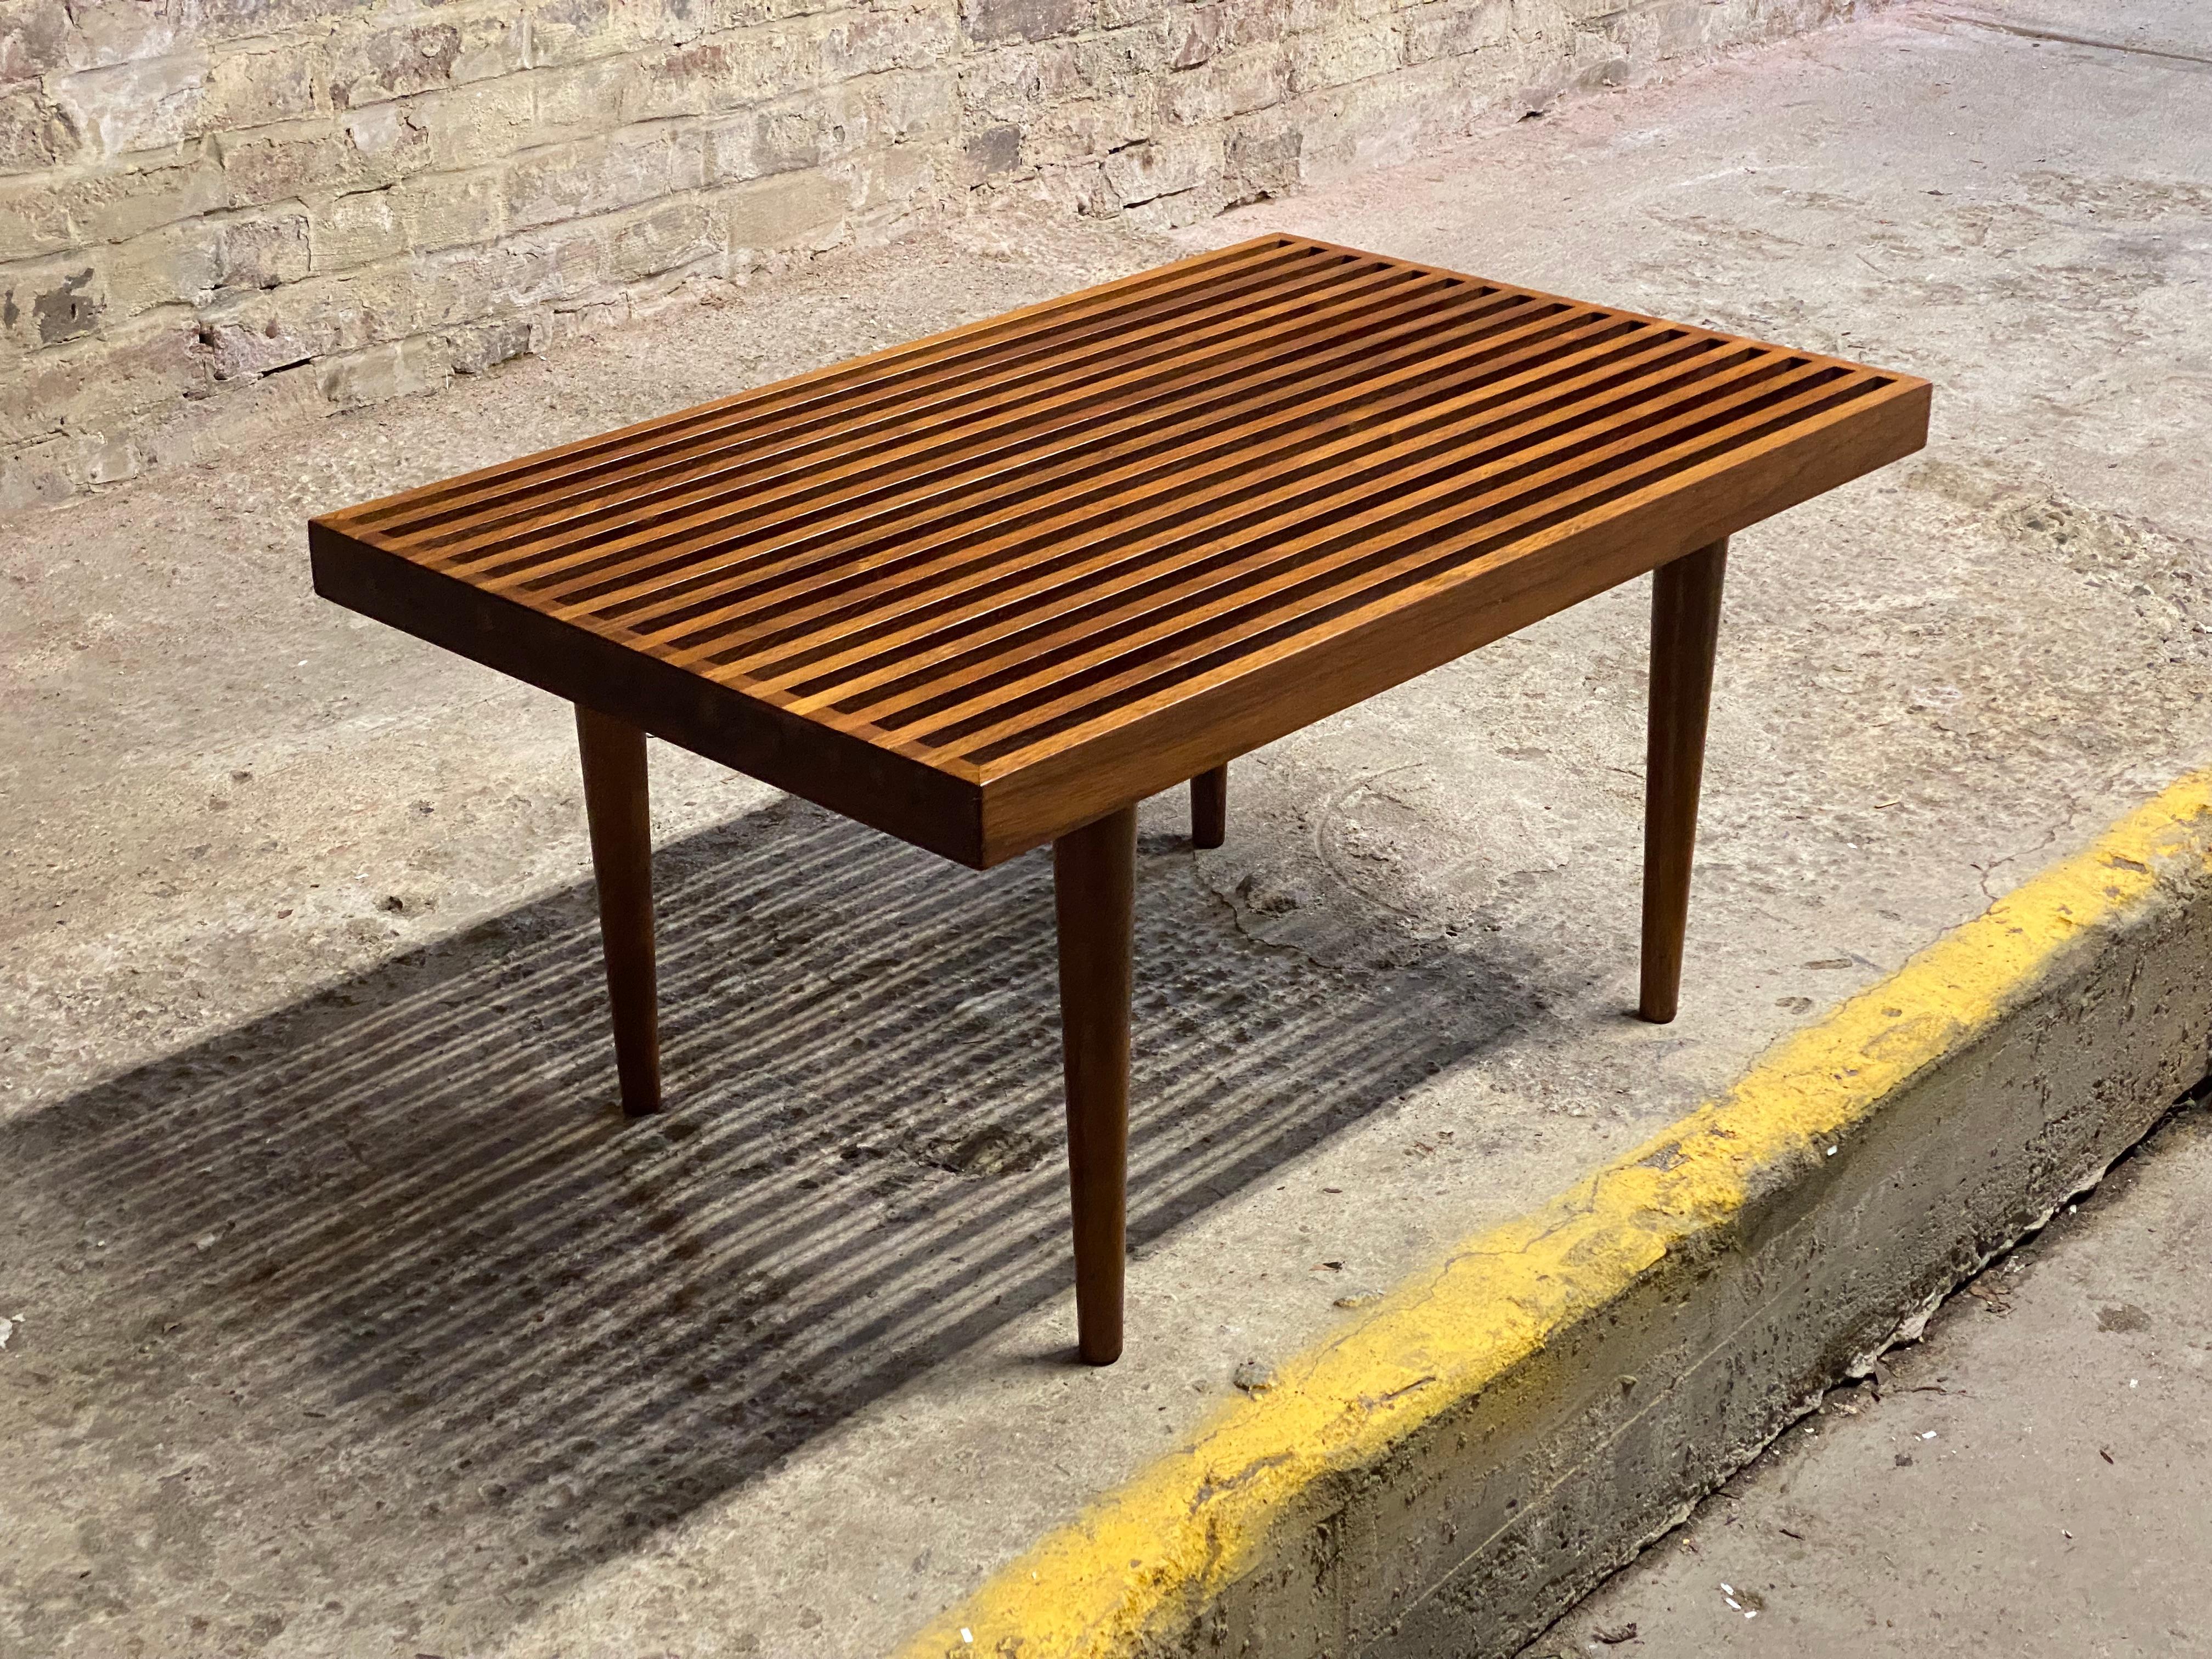 A Mel Smilow (1922-2002) designed solid walnut slat table. Wonderful oiled walnut featuring that signature splined corners, cross cut color contrast sides and removable tapered legs. Flat pack design. These are great accent tables or small benches